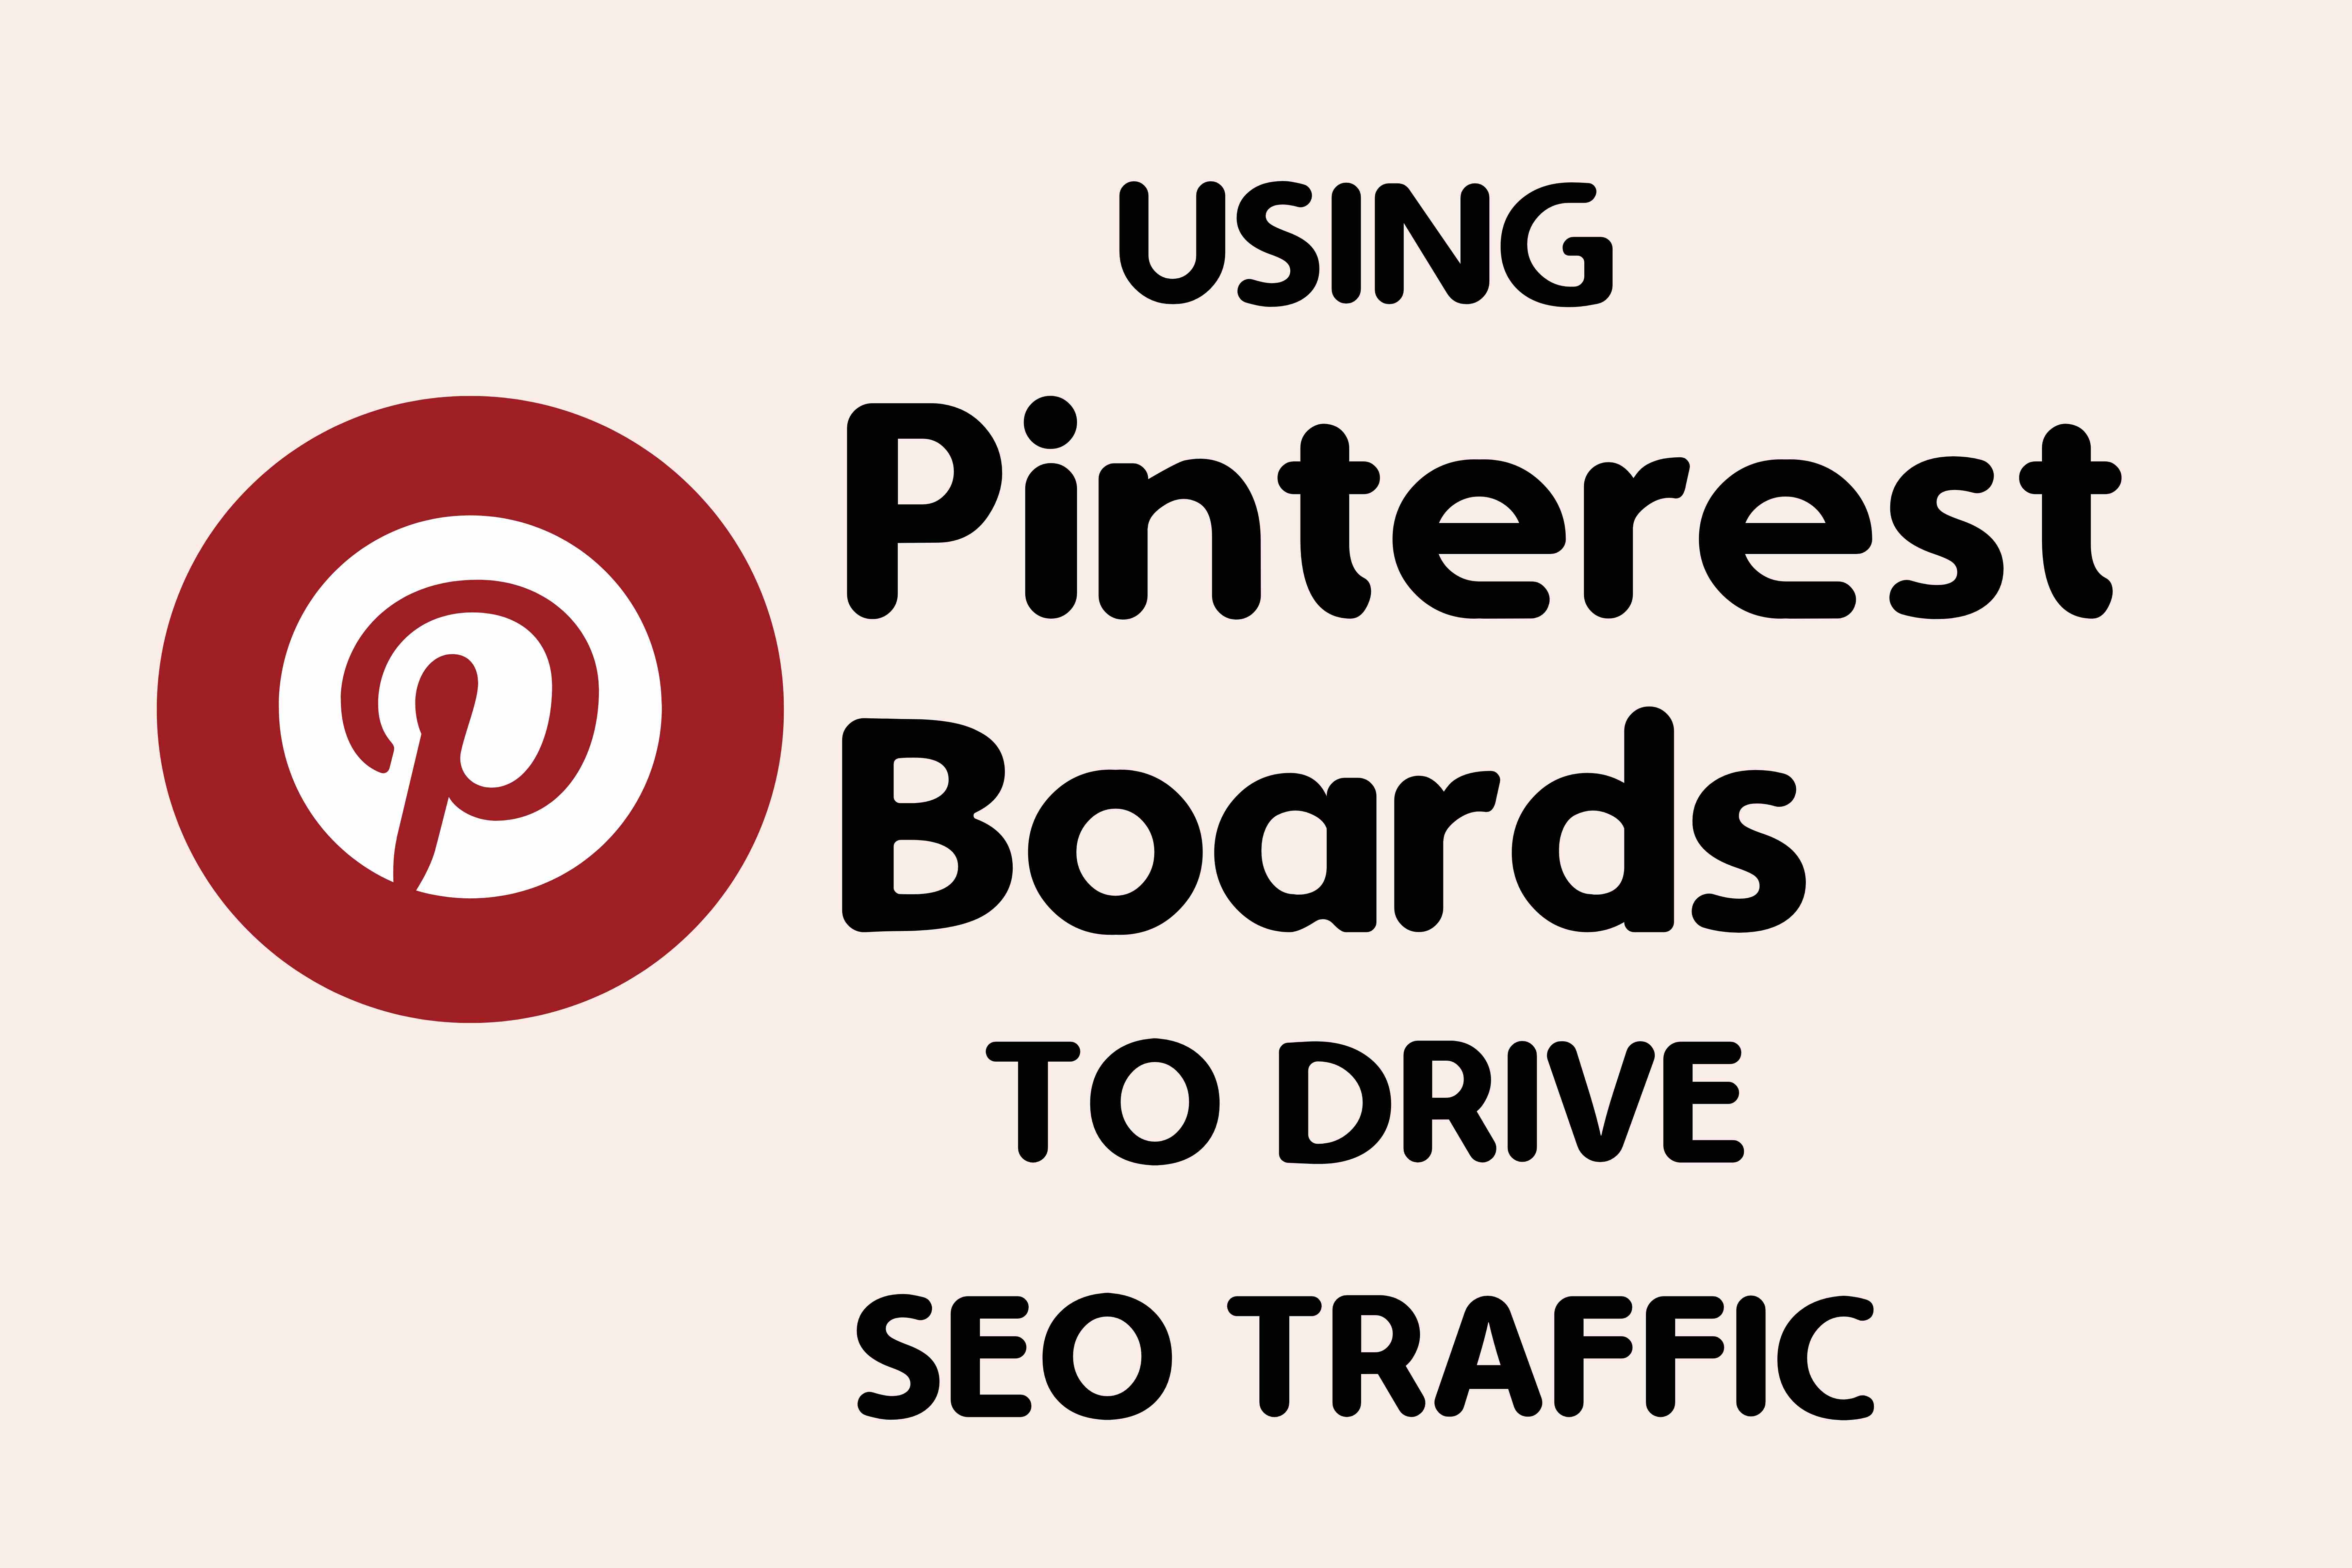 Using Pinterest Boards to Drive SEO Traffic